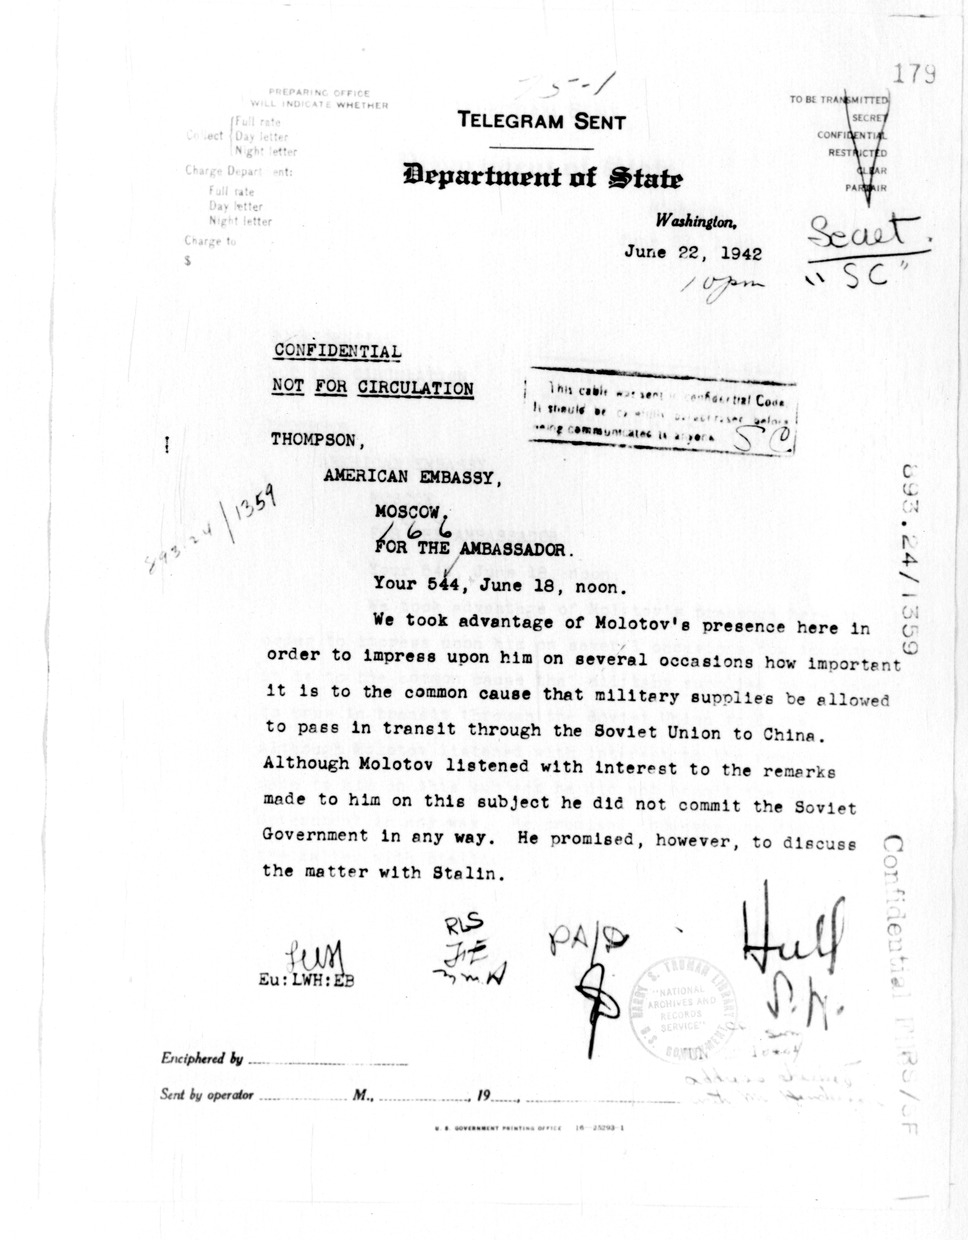 Department of State Telegram from Secretary of State Cordell Hull to American Embassy, Moscow